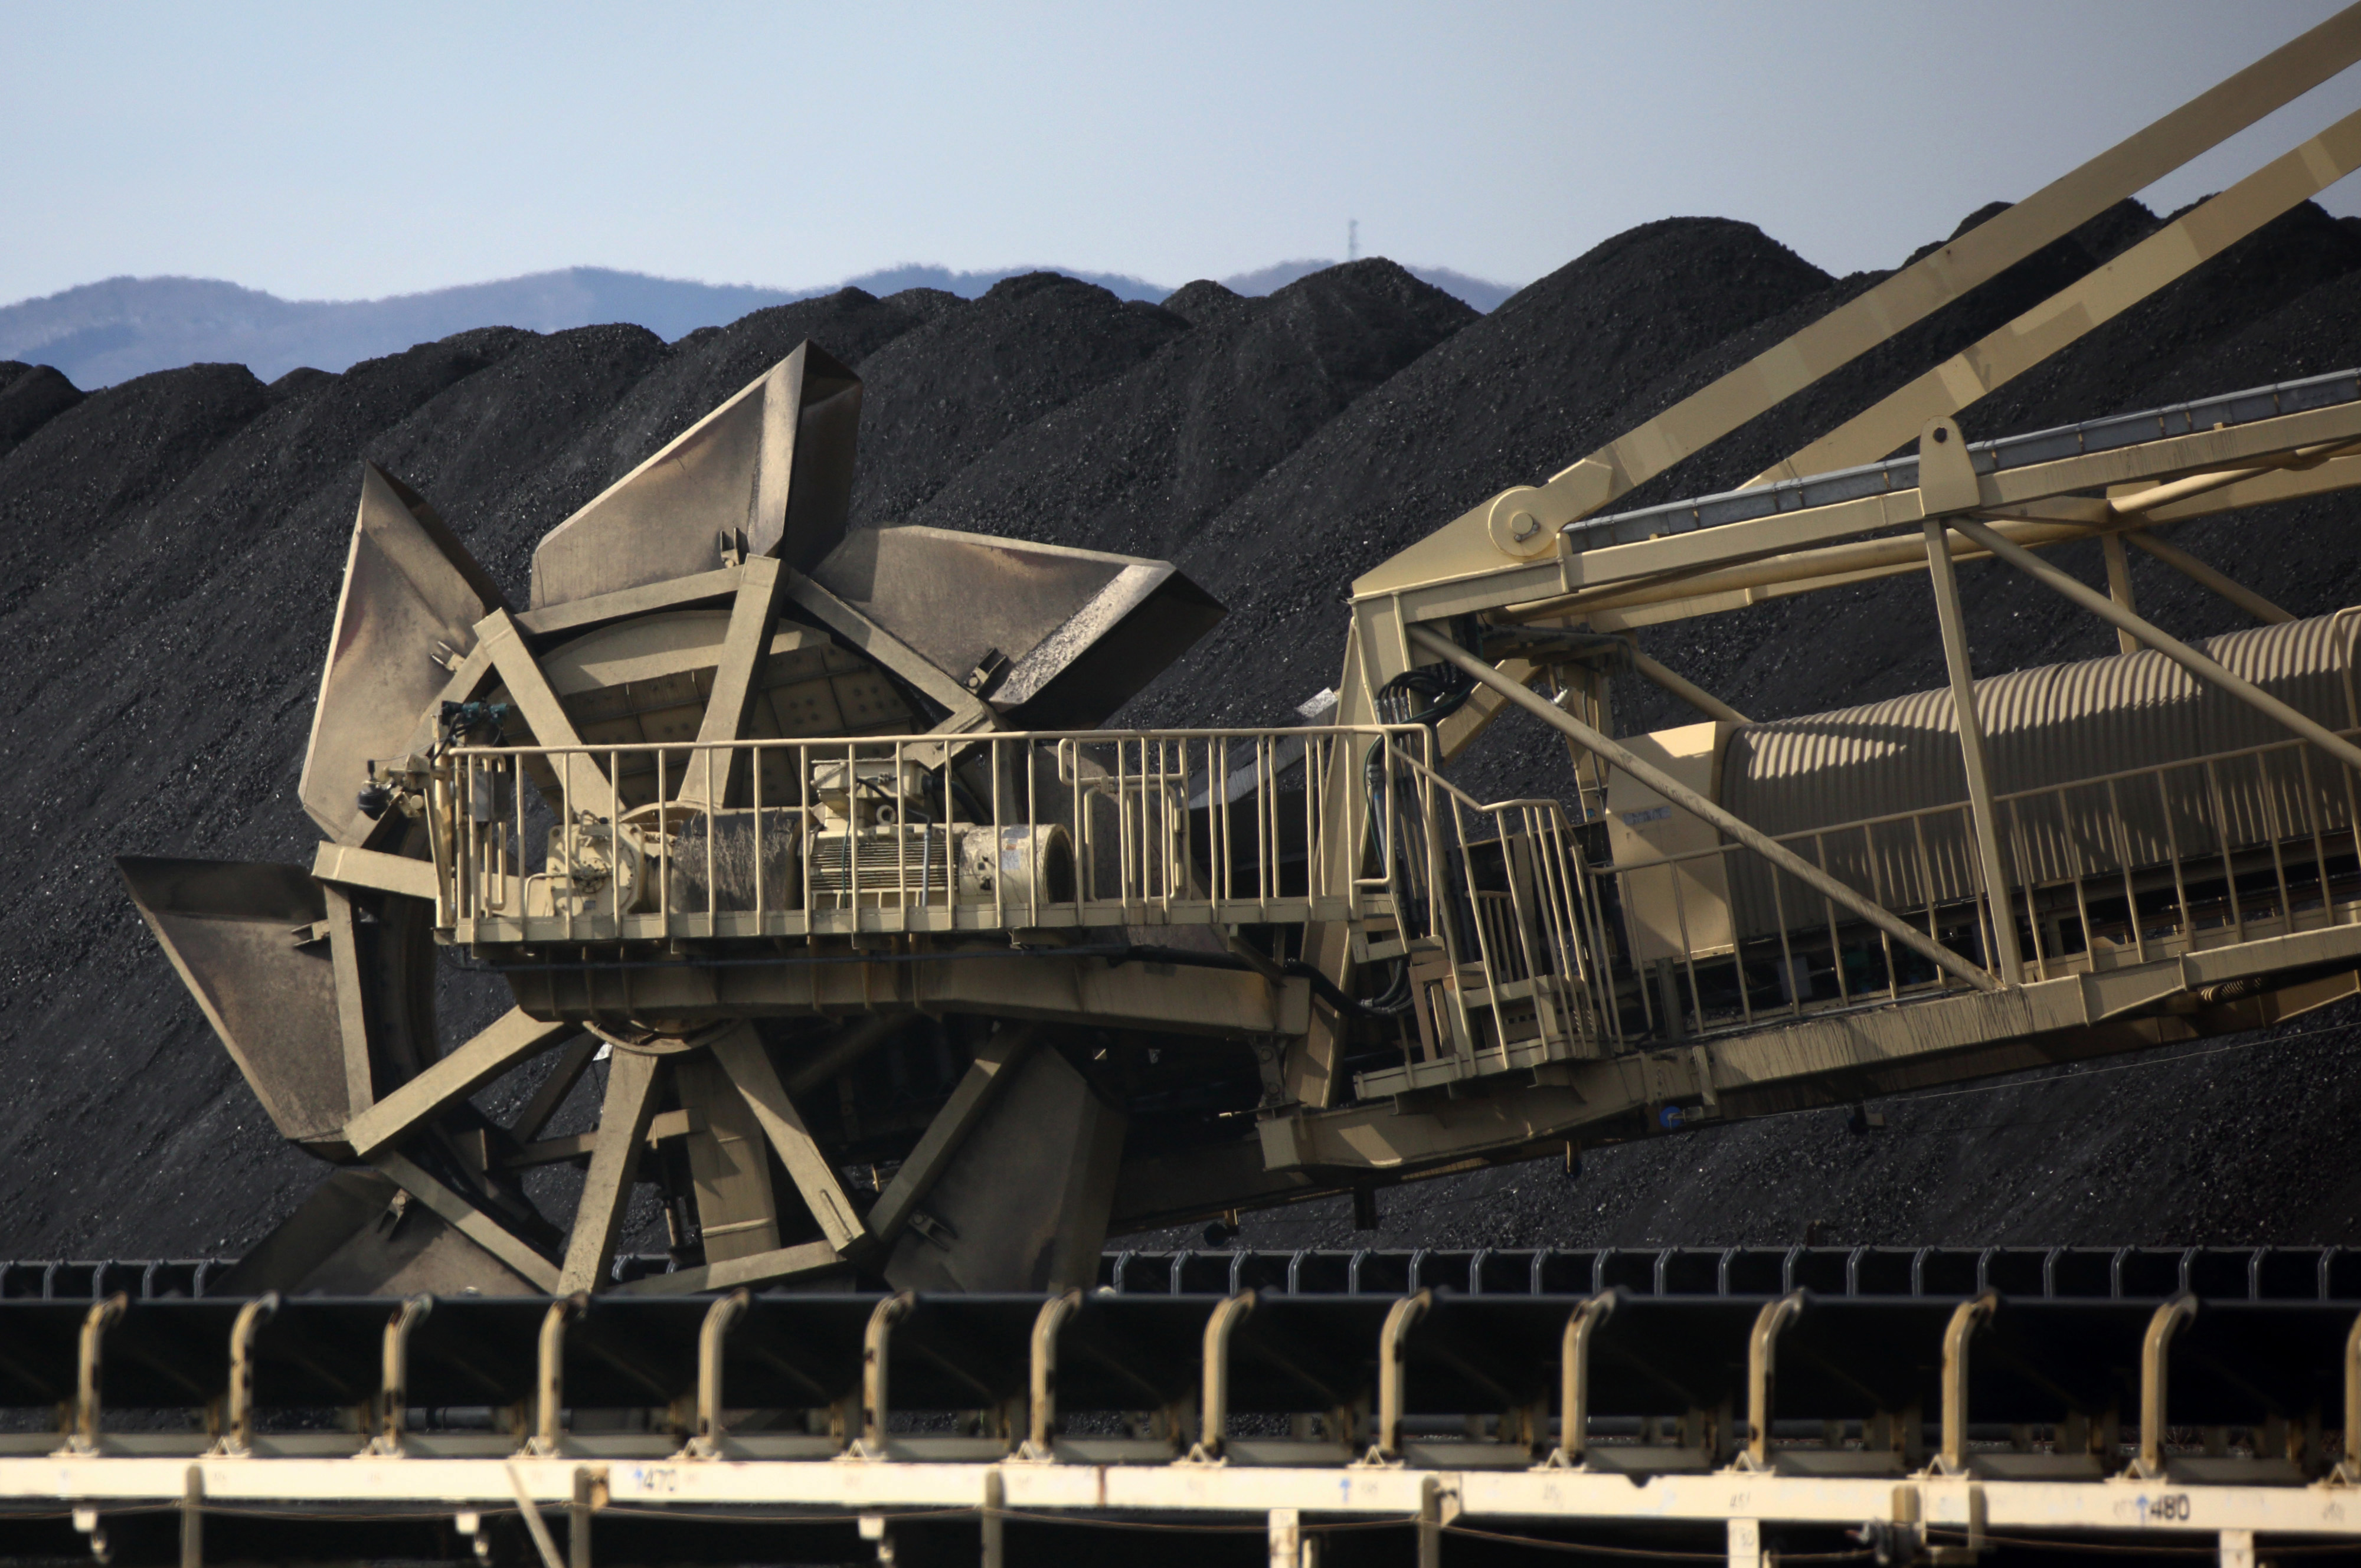 A bucket-wheel excavator moves coal at a stockpiling site at Onahama port in Iwaki, Fukushima Prefecture, in February. With the nation's nuclear power plants out of action, Japan now has to rely on oil-, coal- and gas-fired plants to replace more than 25 percent of its electricity needs lost since the multiple core meltdowns of March 2011. | BLOOMBERG